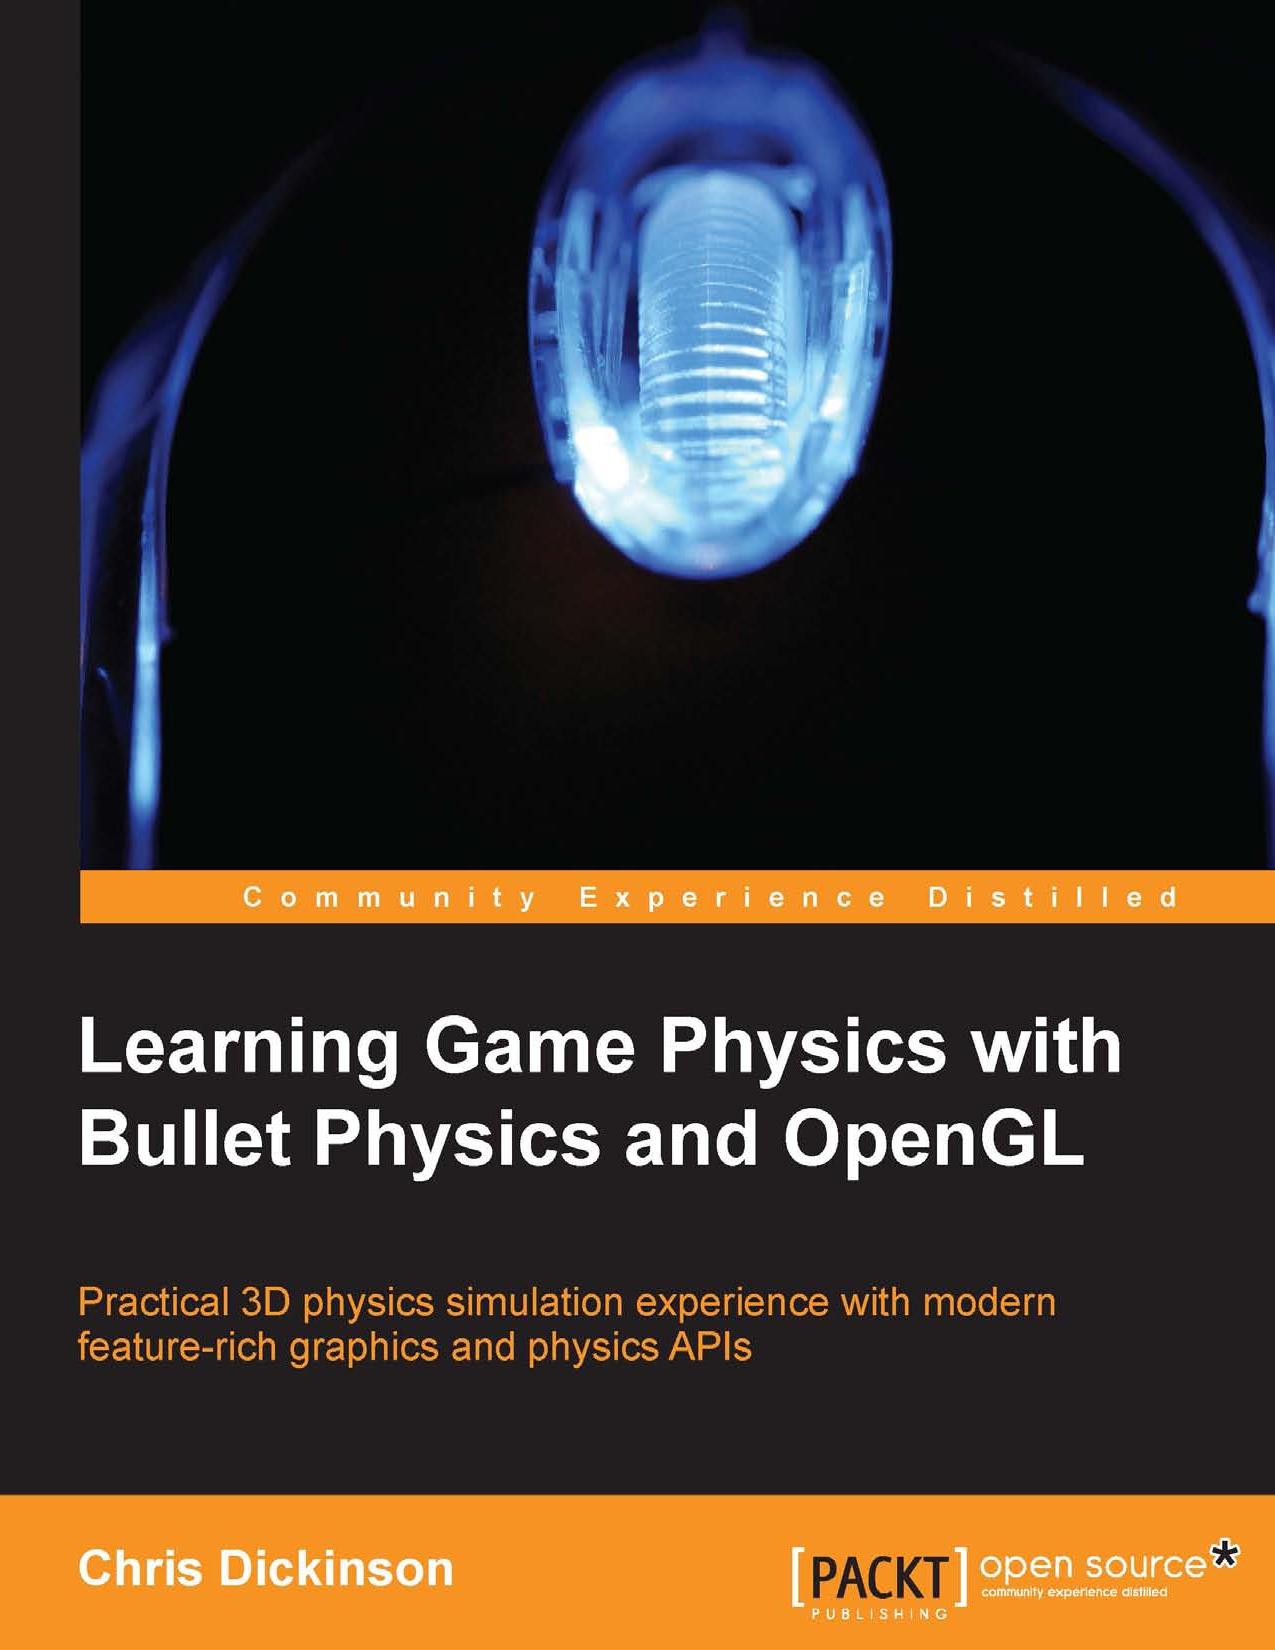 Learning Game Physics With Bullet Physics and OpenGL